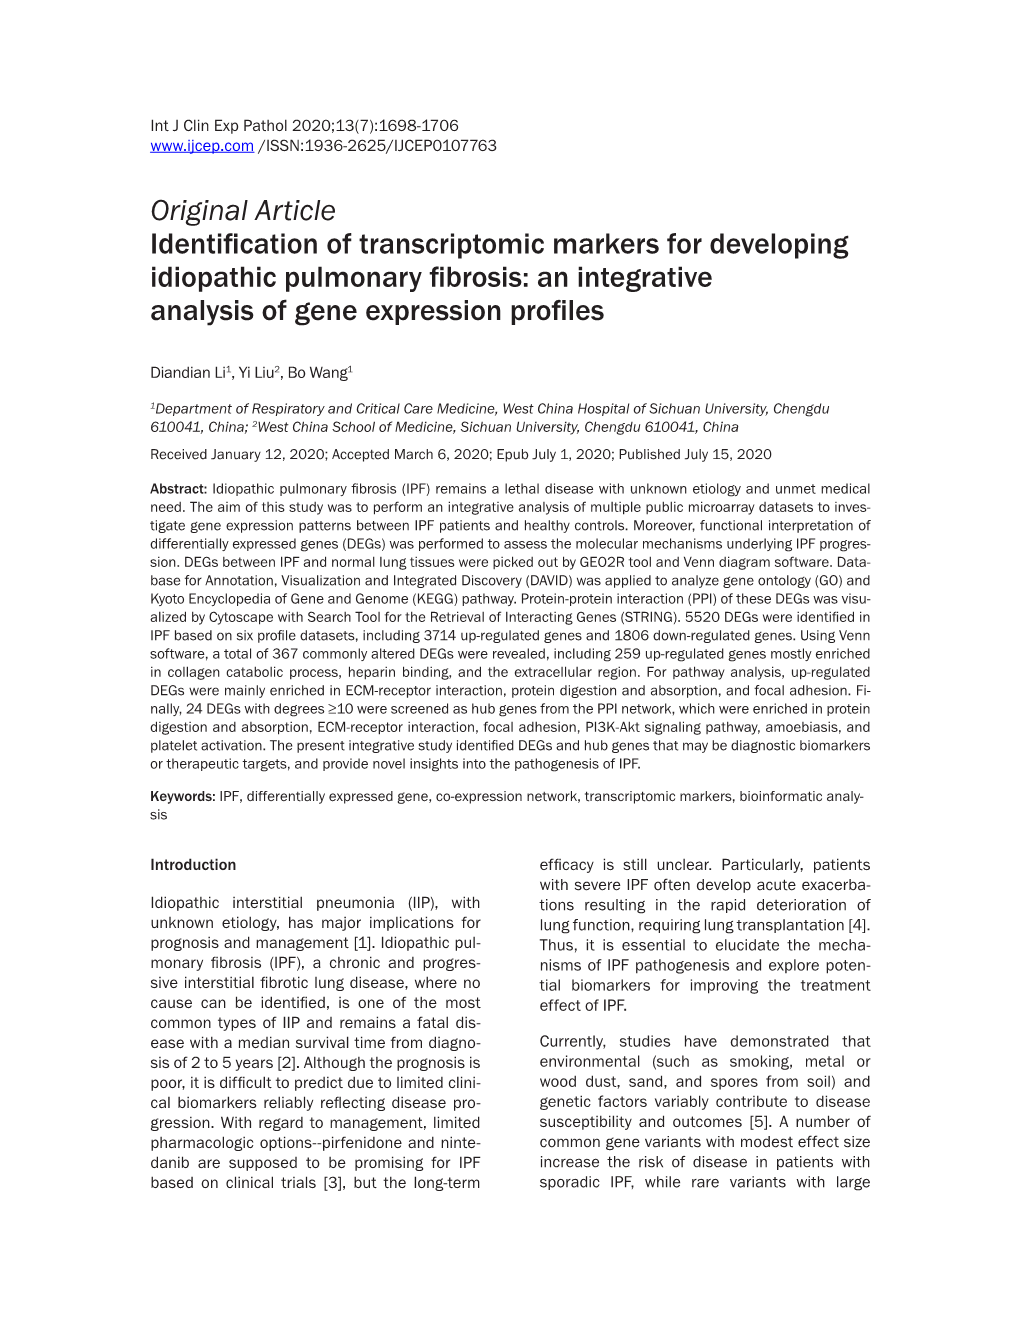 An Integrative Analysis of Gene Expression Profiles